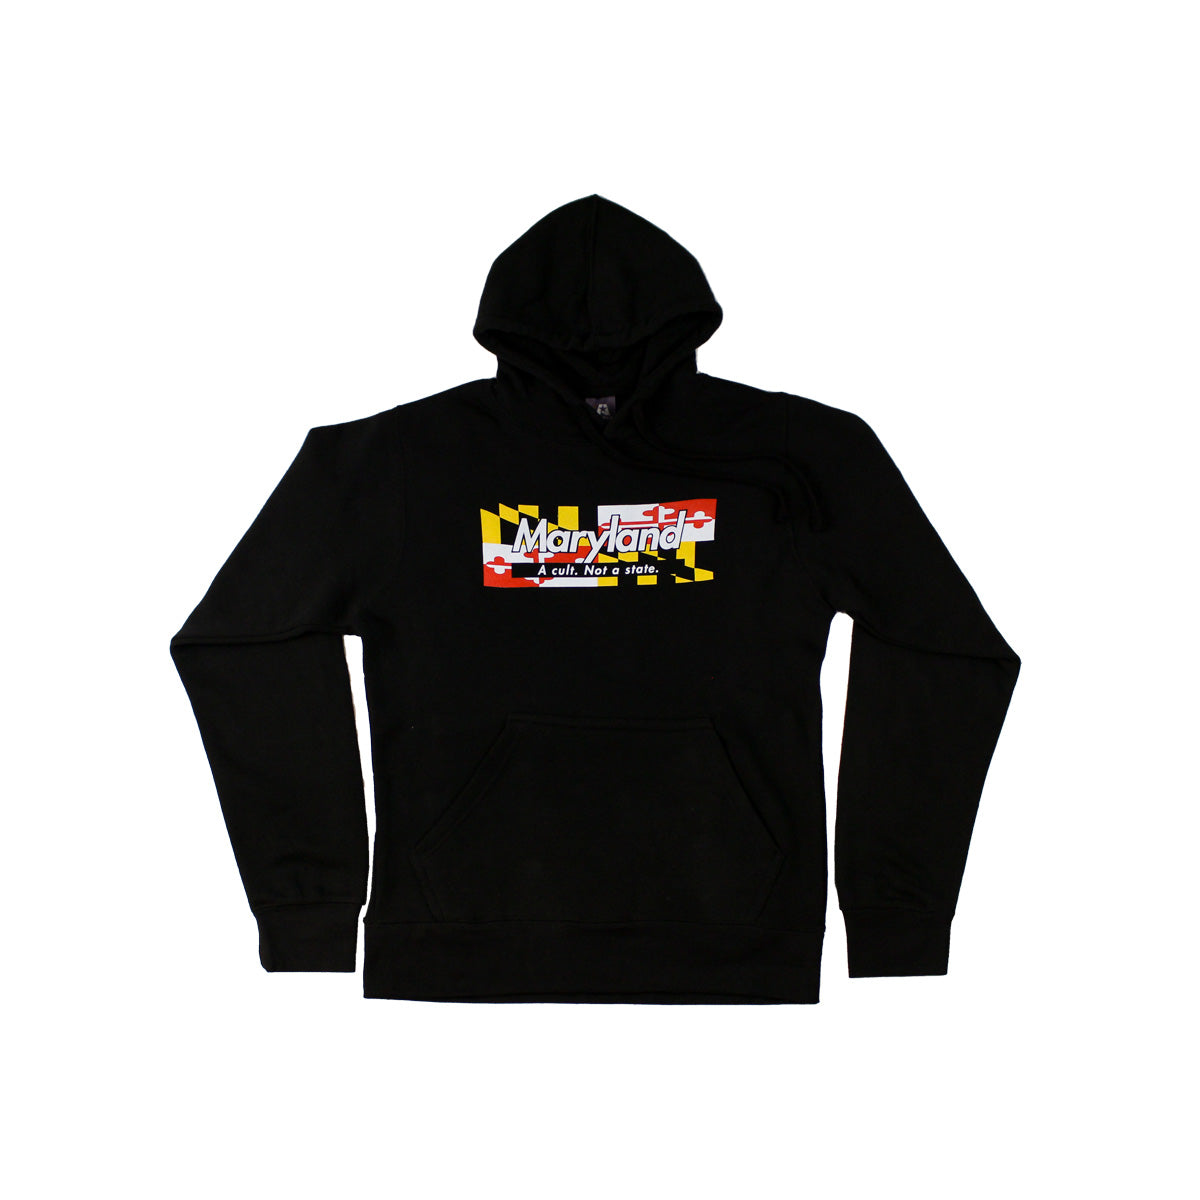 Maryland - A Cult. Not A State. (Black) / Hoodie - Route One Apparel